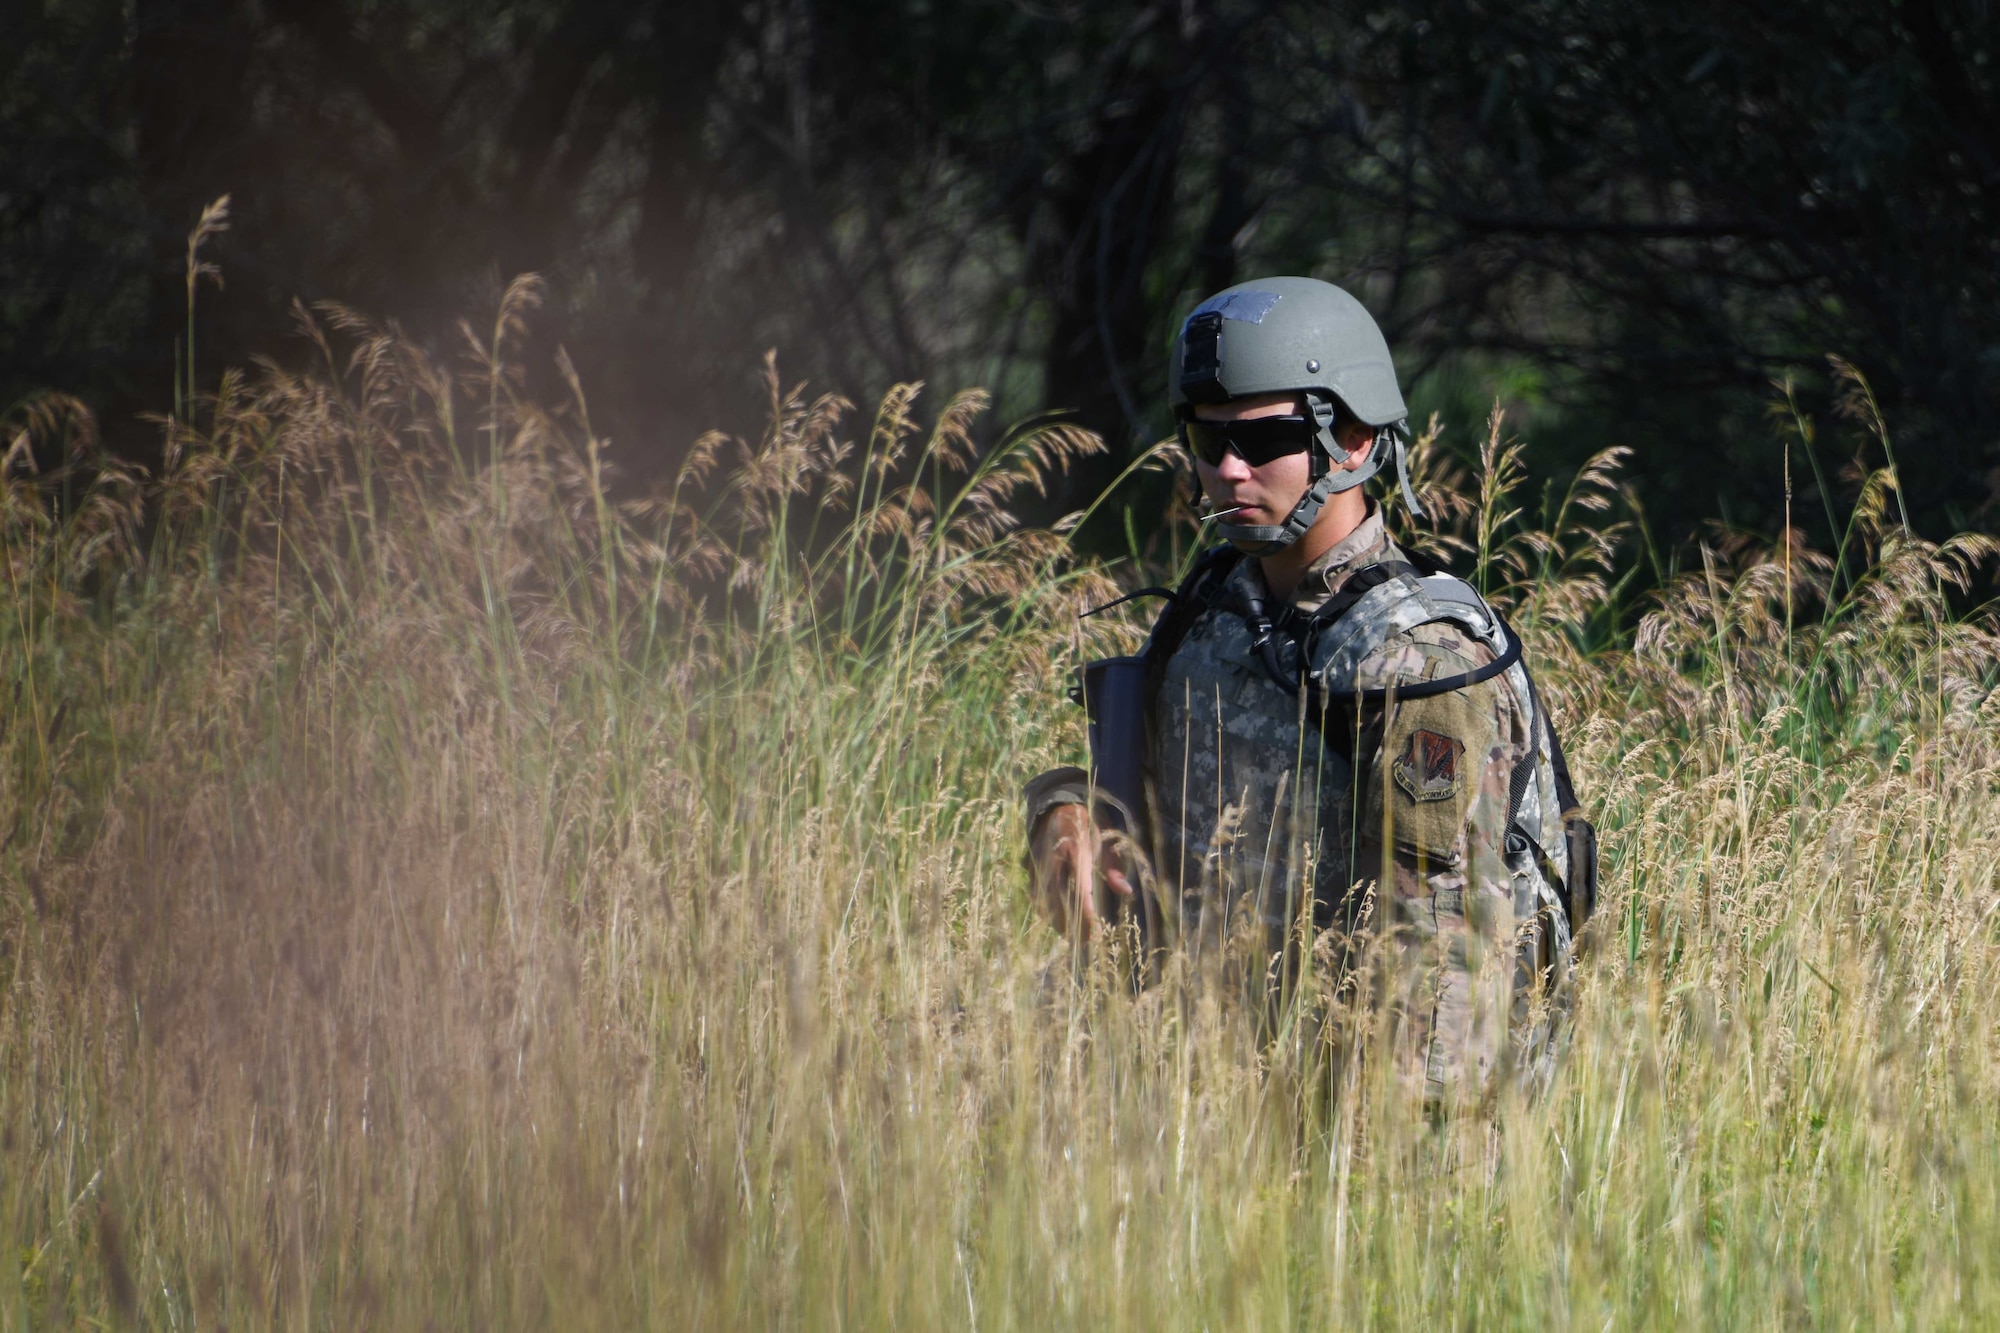 An Airman from the 319th Civil Engineer Squadron sits on watch during a Prime Base Engineer Emergency Force training on Grand Forks Air Force Base, North Dakota, July 14, 2022. The goal of Prime BEEF training is to create and maintain civil engineer forces capable of completing multiple objectives at any time. (U.S. Air Force photo by Senior Airman Ashley Richards)